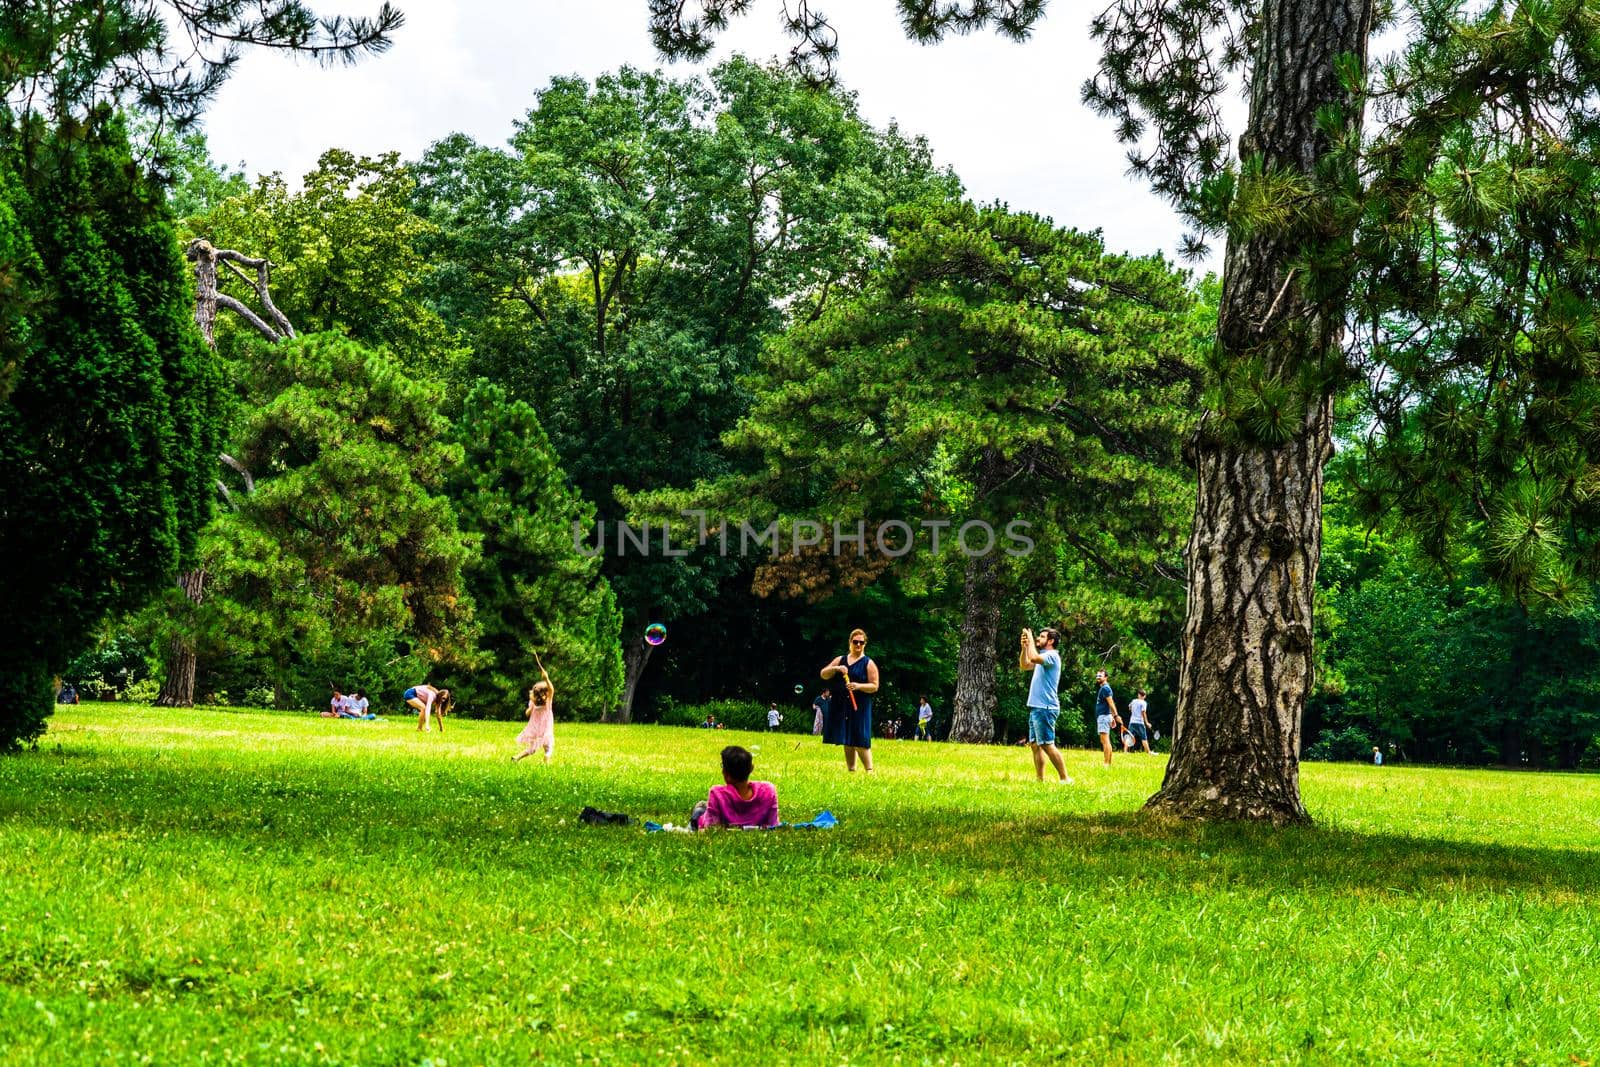 Mother making soap bubbles for herlittle daughter, people having picnic relaxing and having fun during coronavirus crisis in park and gardens of the domain from Mogosoaia in Bucharest, Romania, 2020.